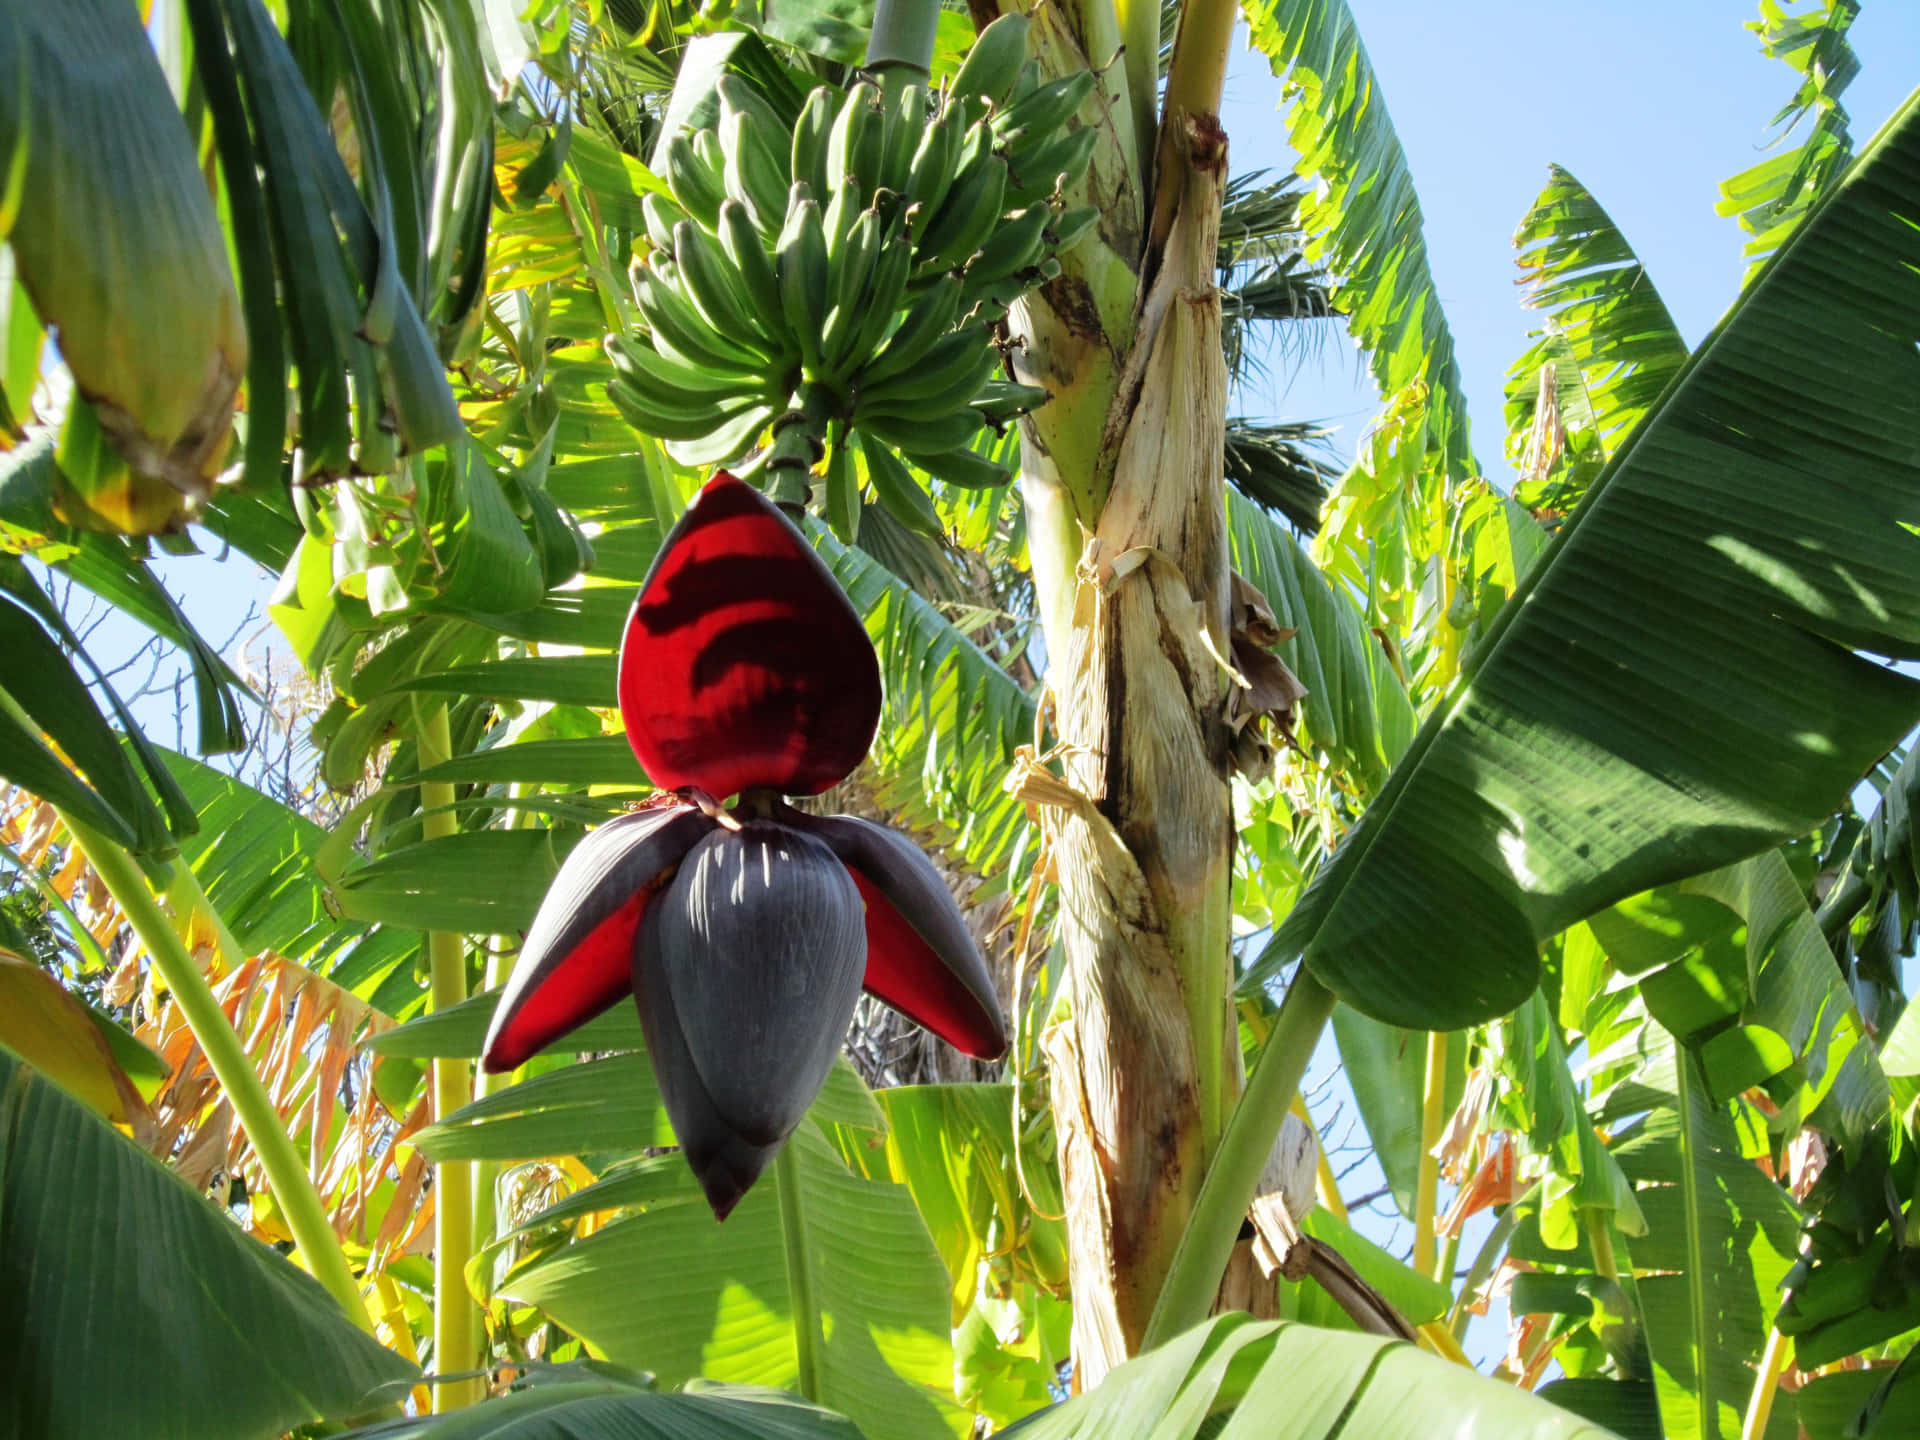 Majestic Banana Tree Picture - Nature at its Finest